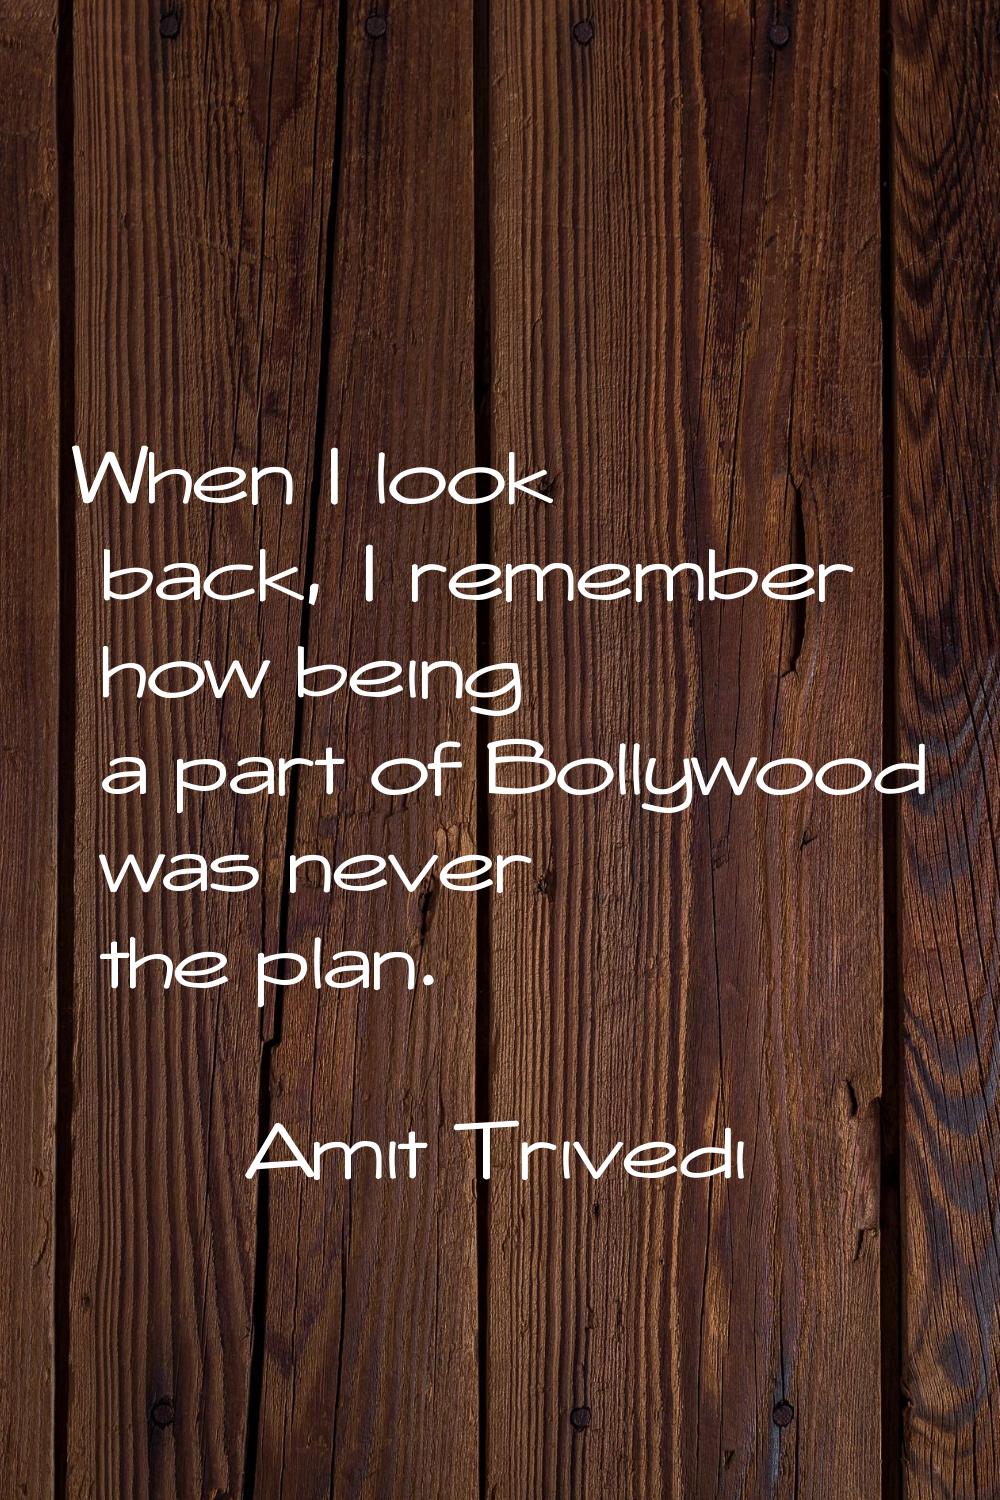 When I look back, I remember how being a part of Bollywood was never the plan.